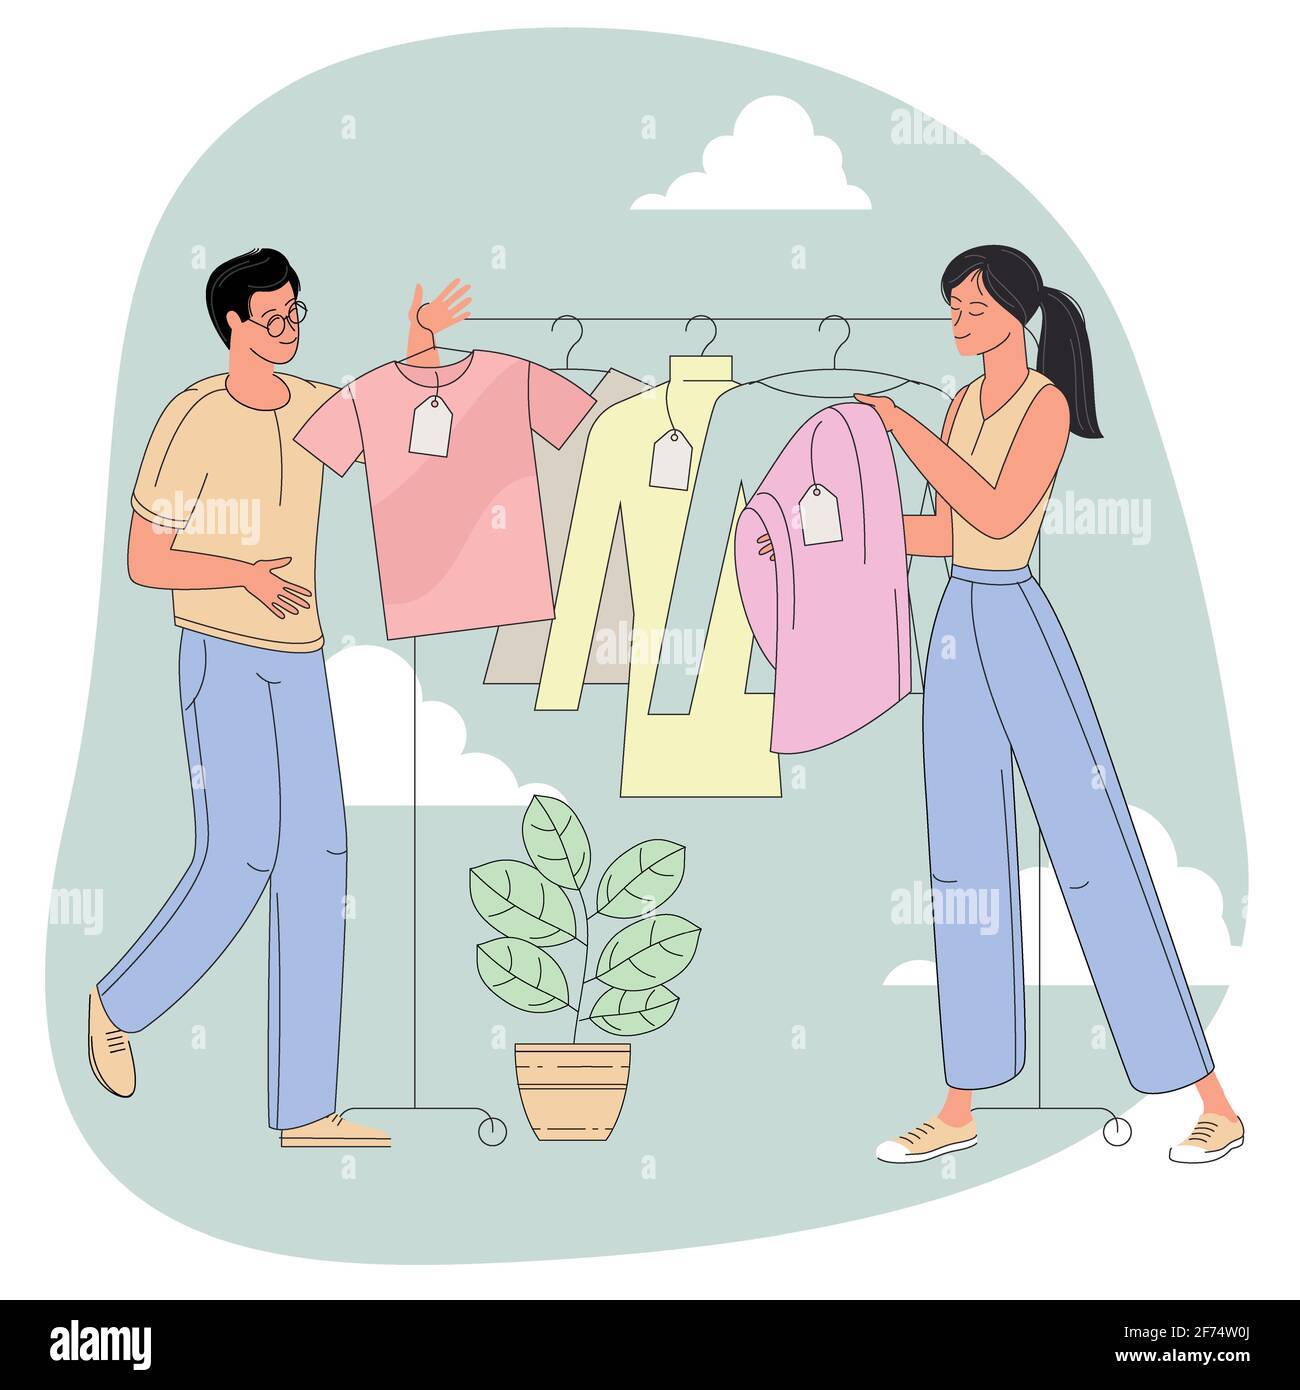 Clothing store Stock Vector Images - Alamy